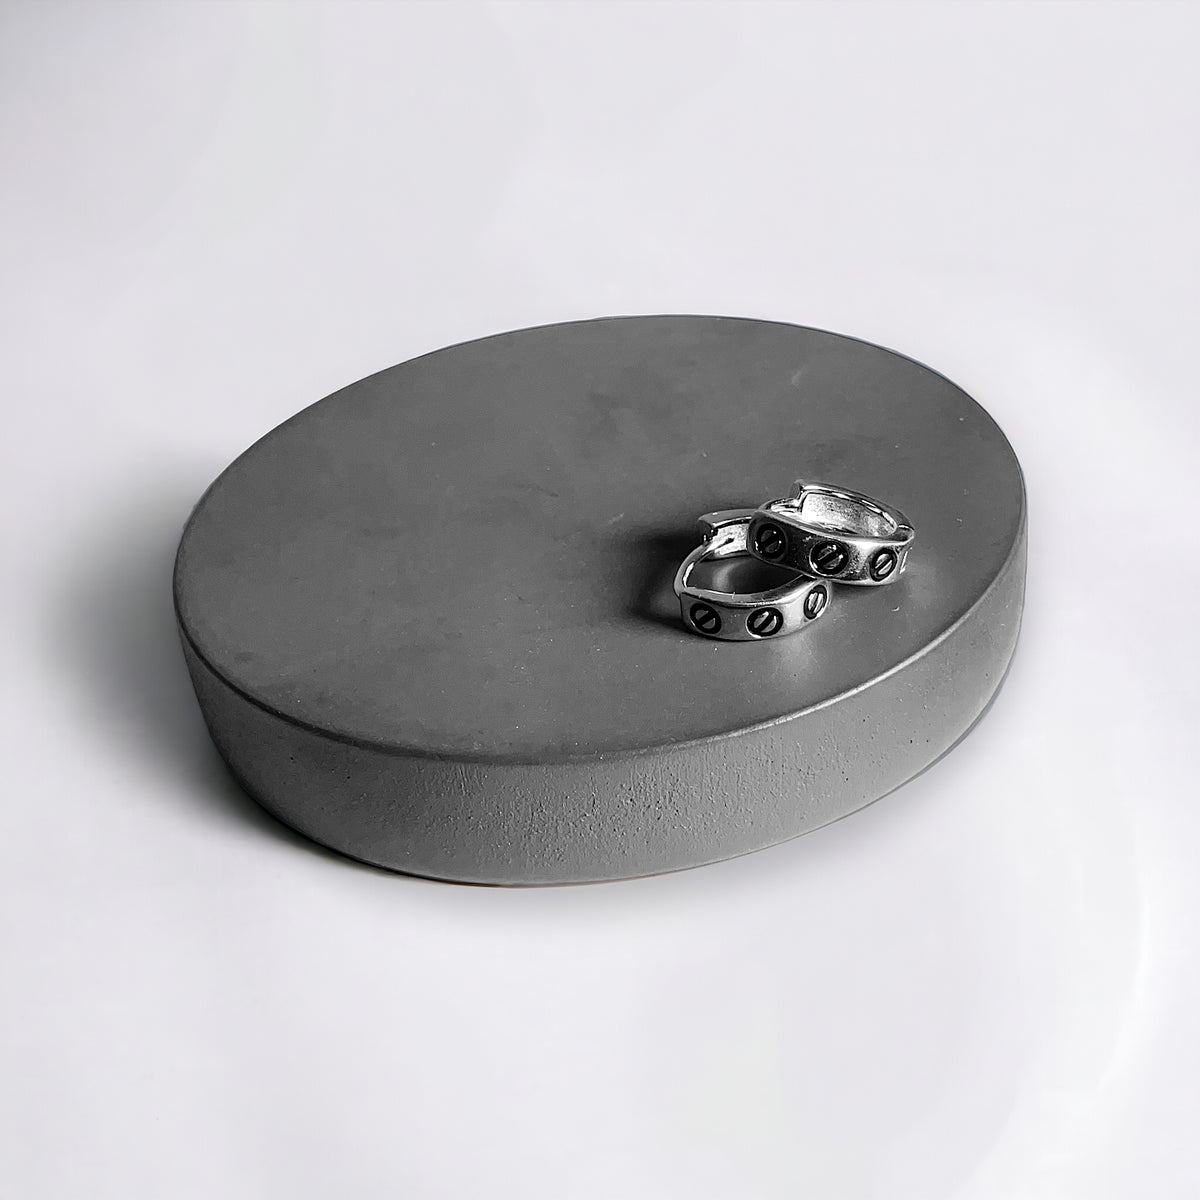 a round metal object with a small metal object on top of it